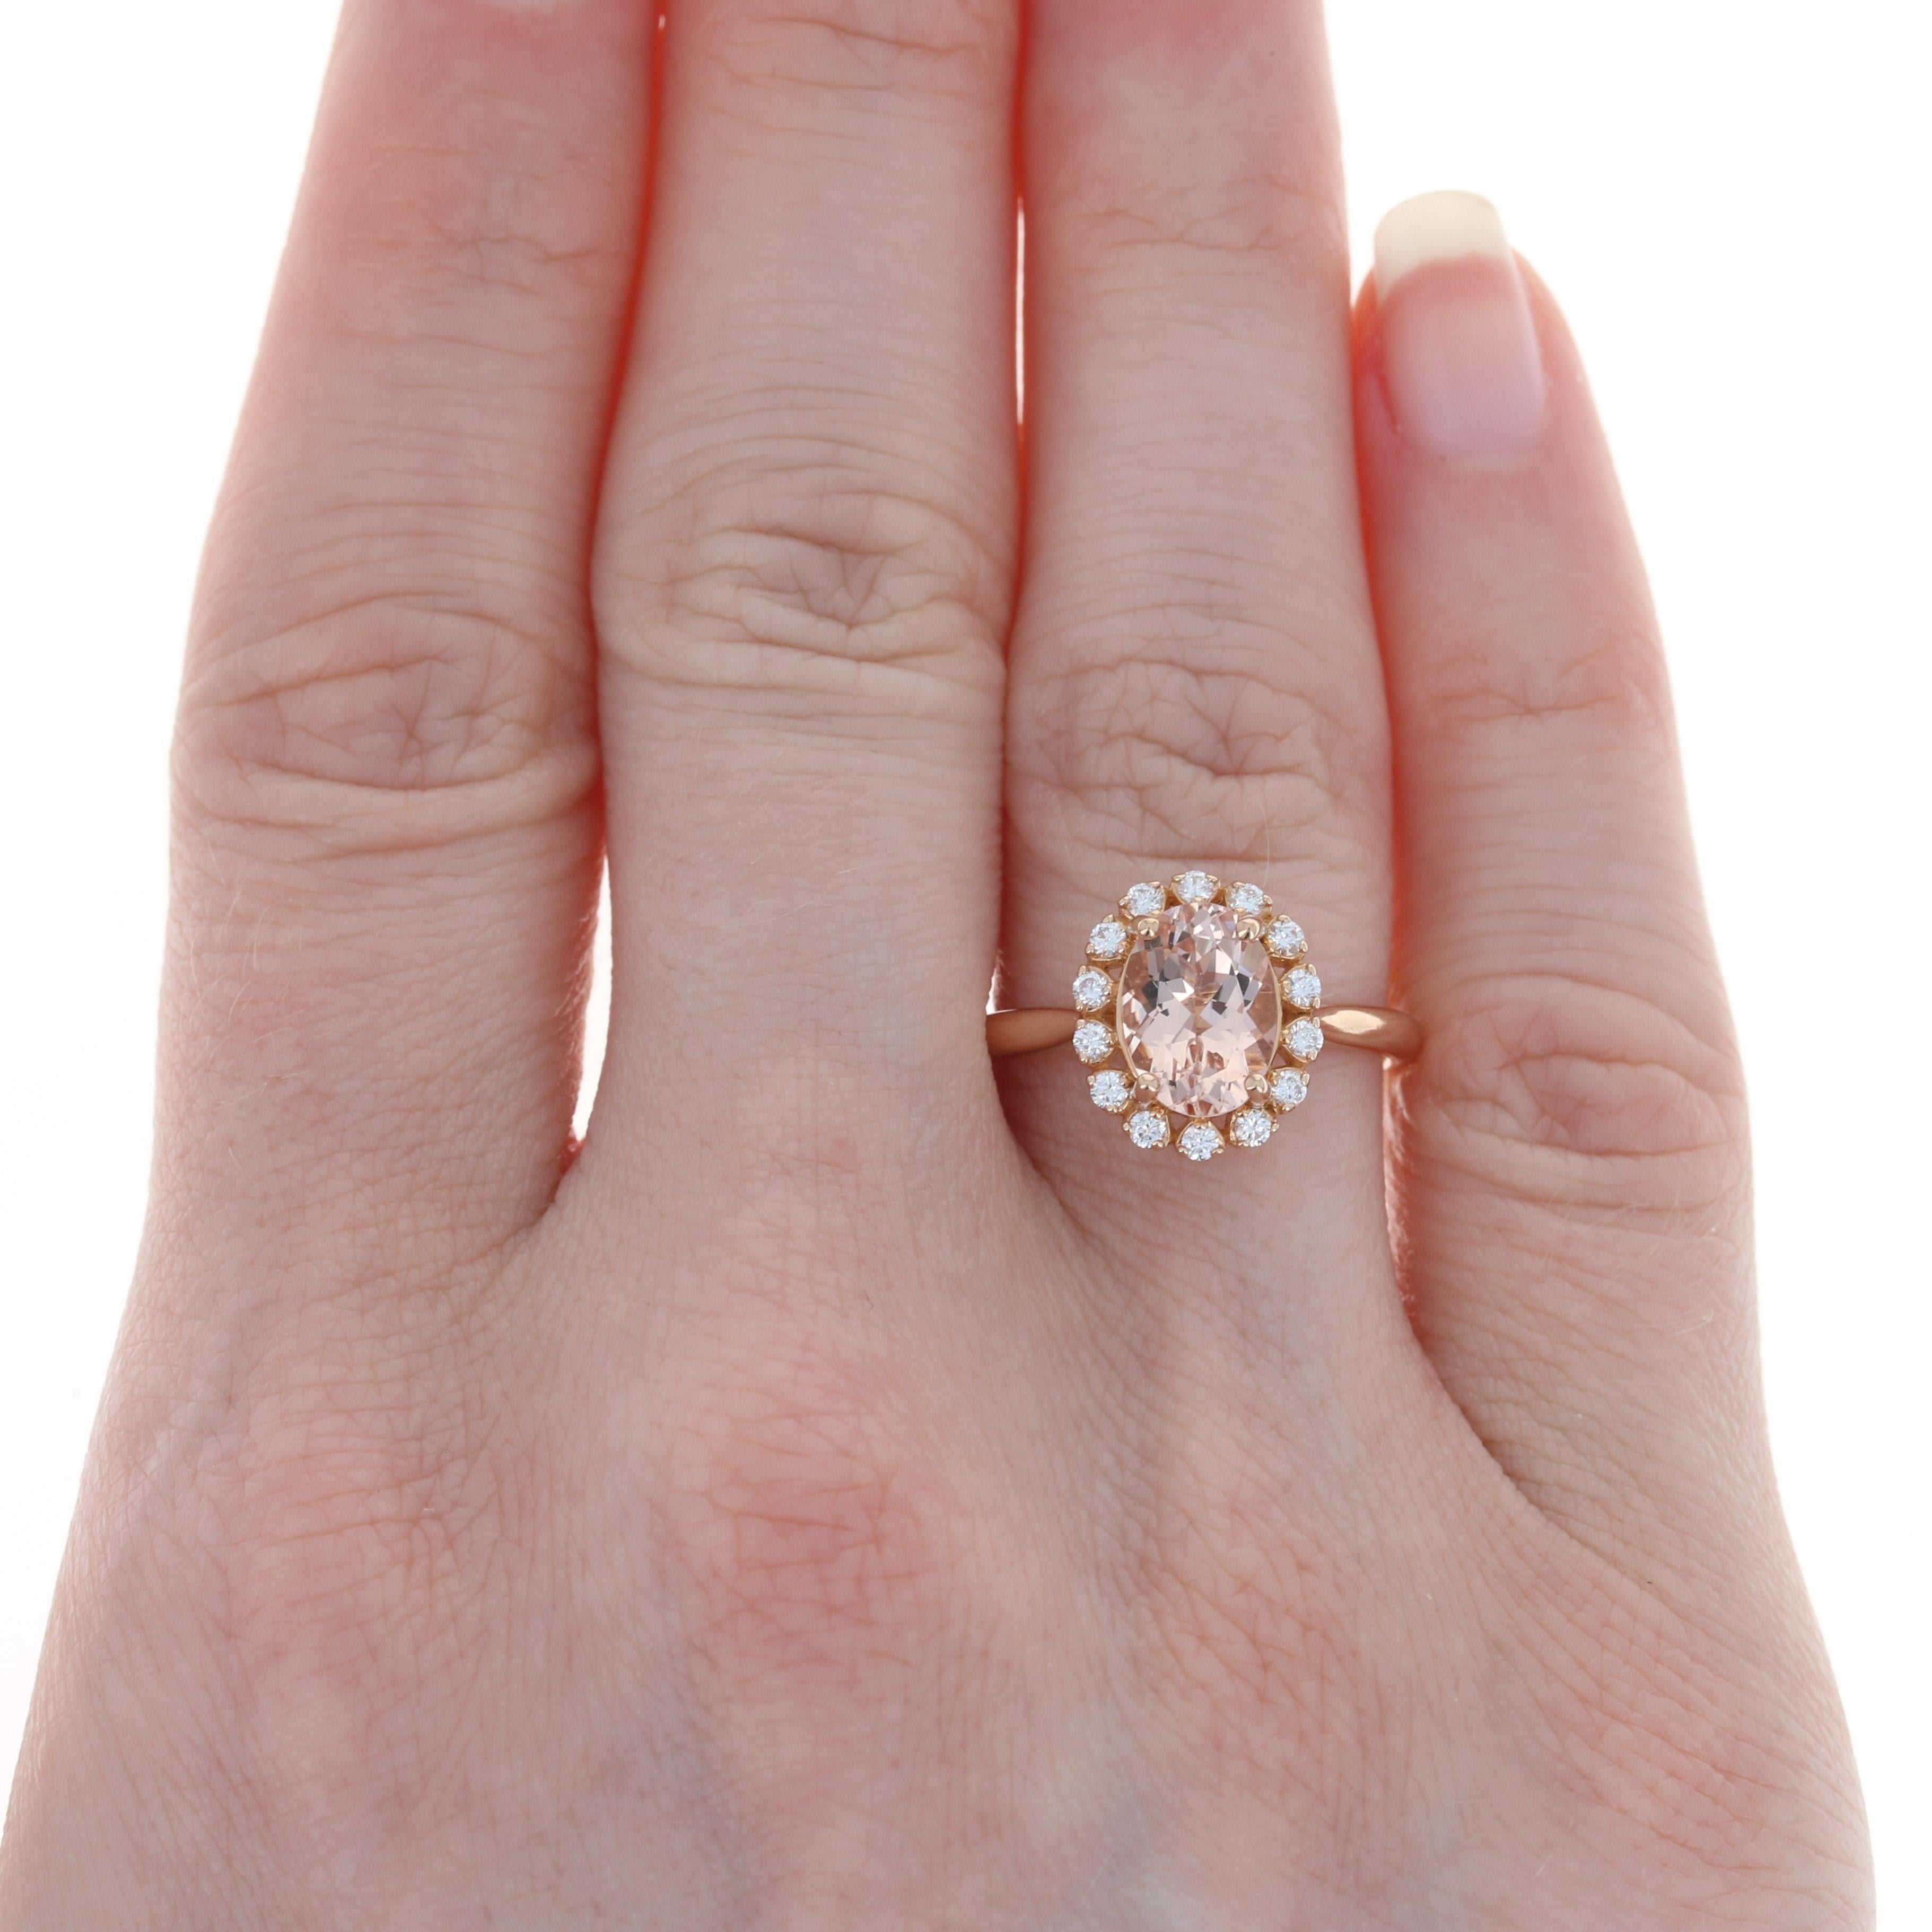 Size: 6 3/4
 Sizing Fee: Up 2 sizes for $30 or Down 2 sizes for $25 
 
 Brand: Clyde Duneier
 
 Metal Content: 14k Rose Gold 
 
 Stone Information: 
 Genuine Morganite
 Carat: 1.90ct
 Cut: Oval
 Color: Pink
 Size: 9mm x 6.5mm
 
 Natural Diamonds 
